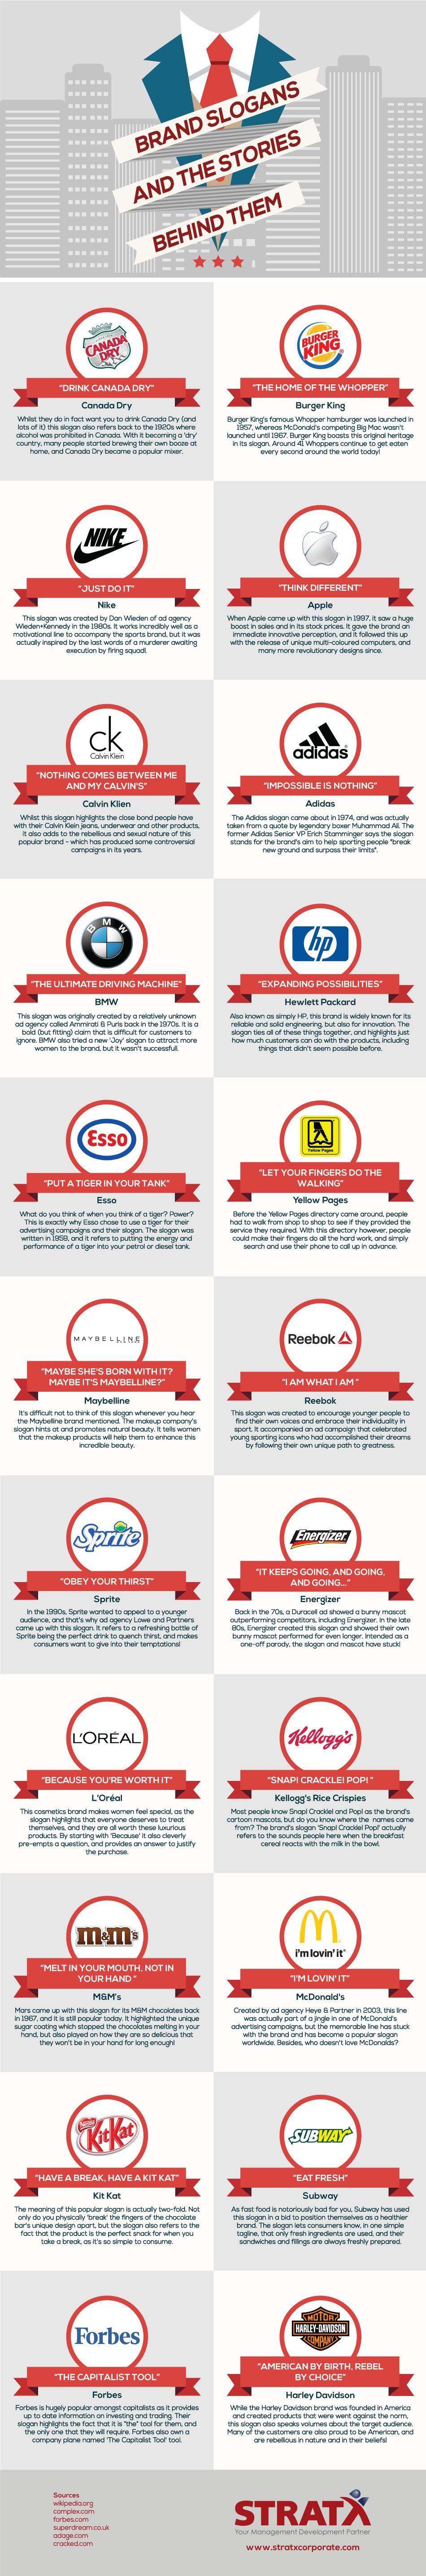 Little Known Company Logo - Famous Brand Slogans And The Little Known Stories Behind Them